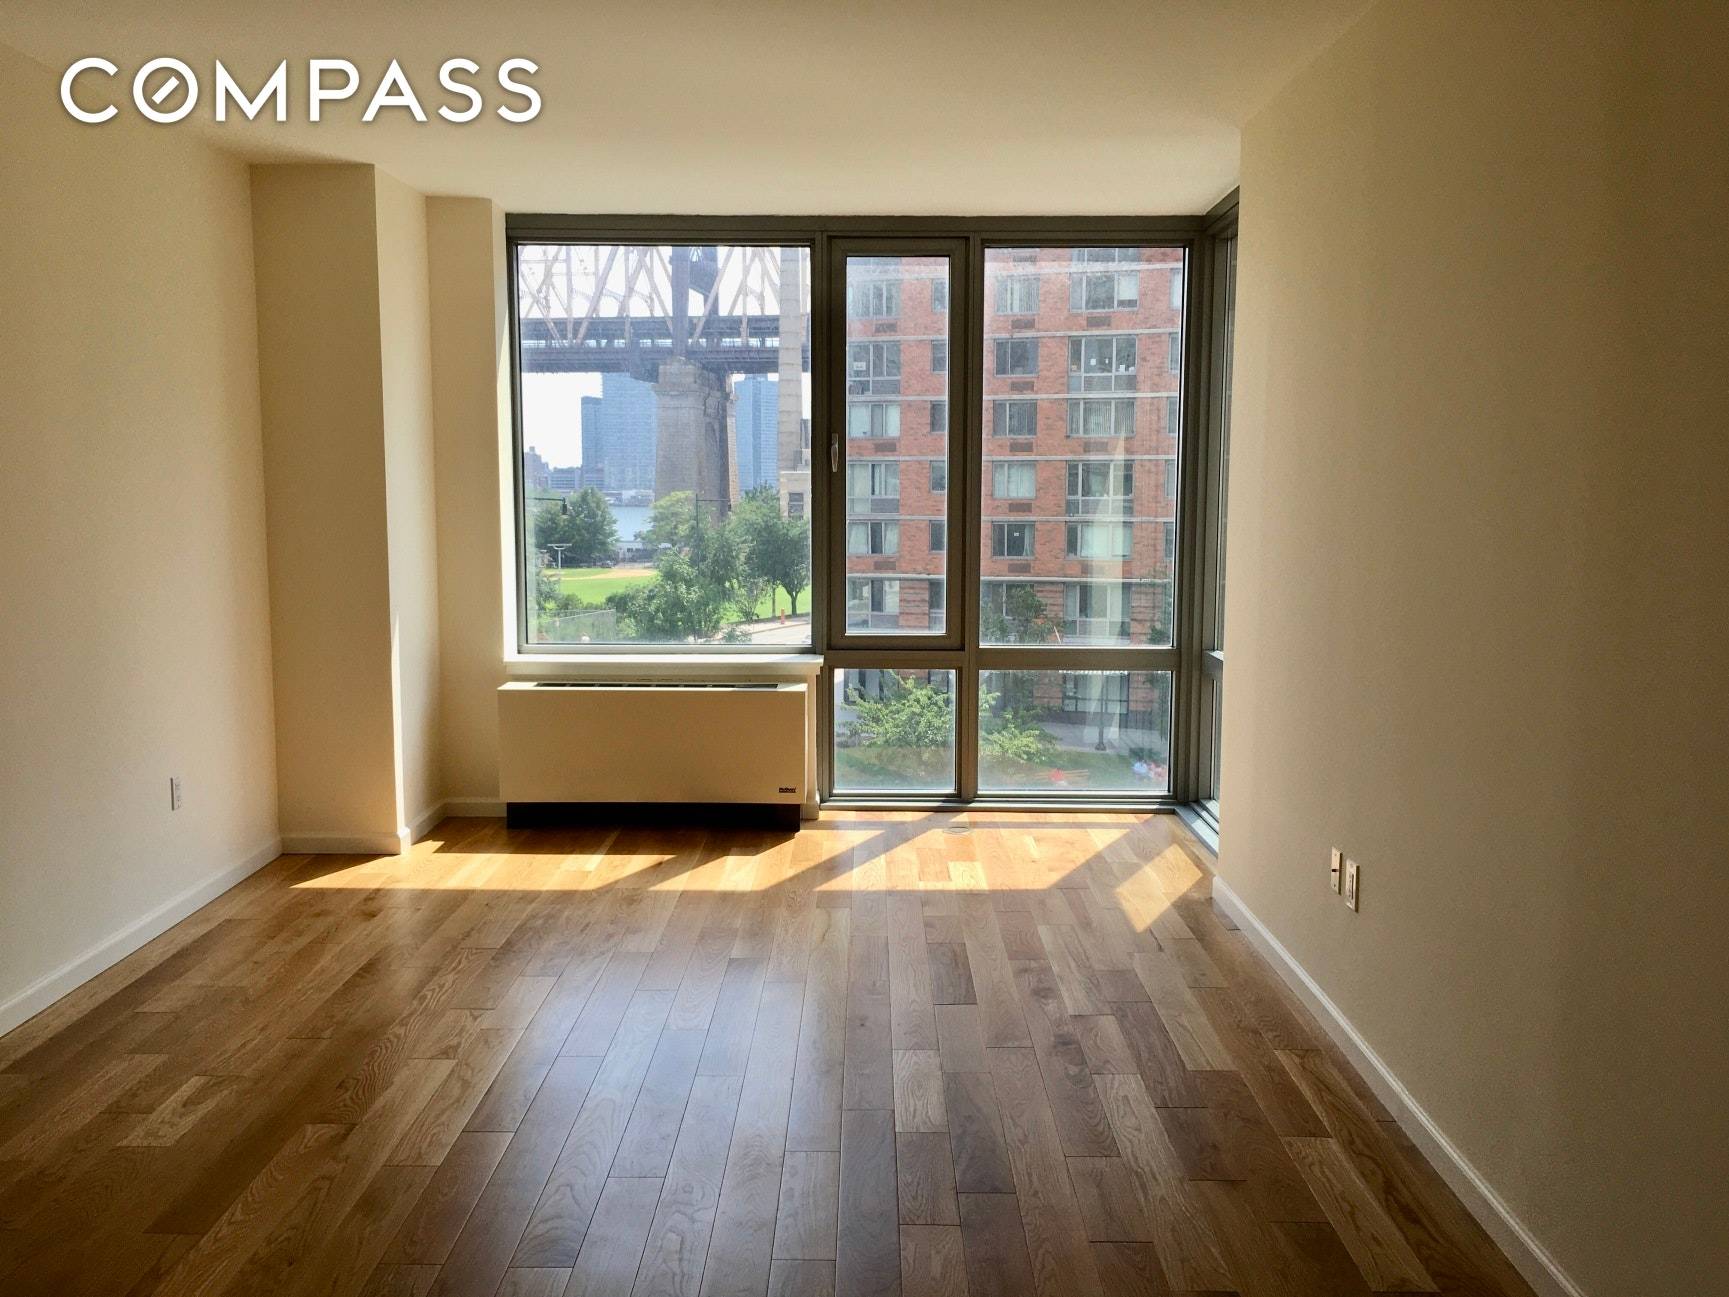 Stainless Steel Appliances, Dishwasher amp ; marble bath Floor to ceiling windows overlooking Manhattan Skyline Brand new Brazilian wood floors Walk in Closet Washer and Dryer included in the unit ...